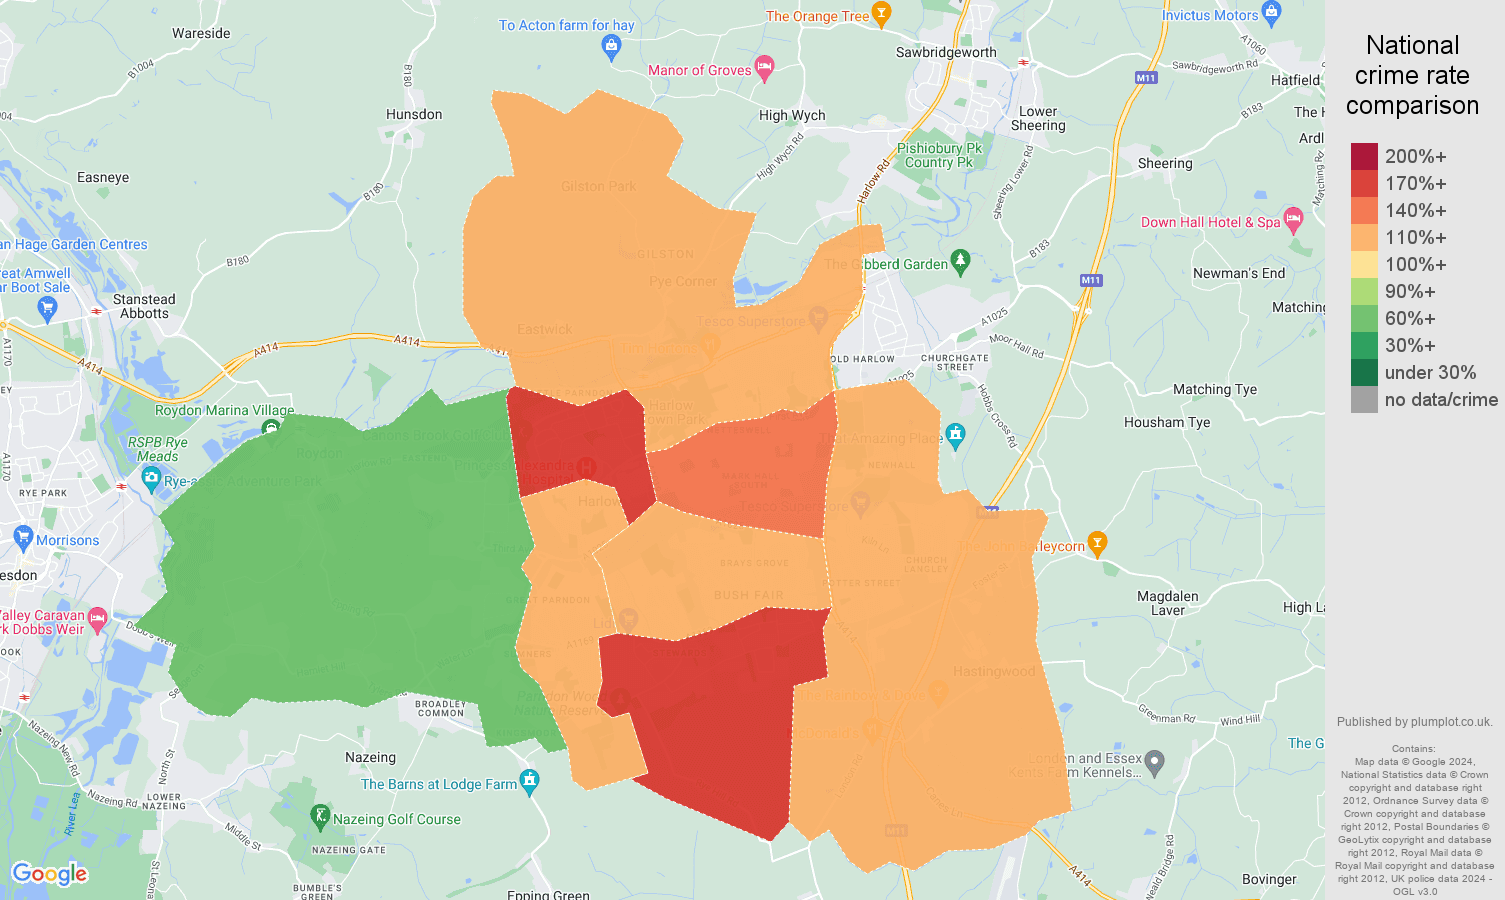 Harlow crime rate comparison map